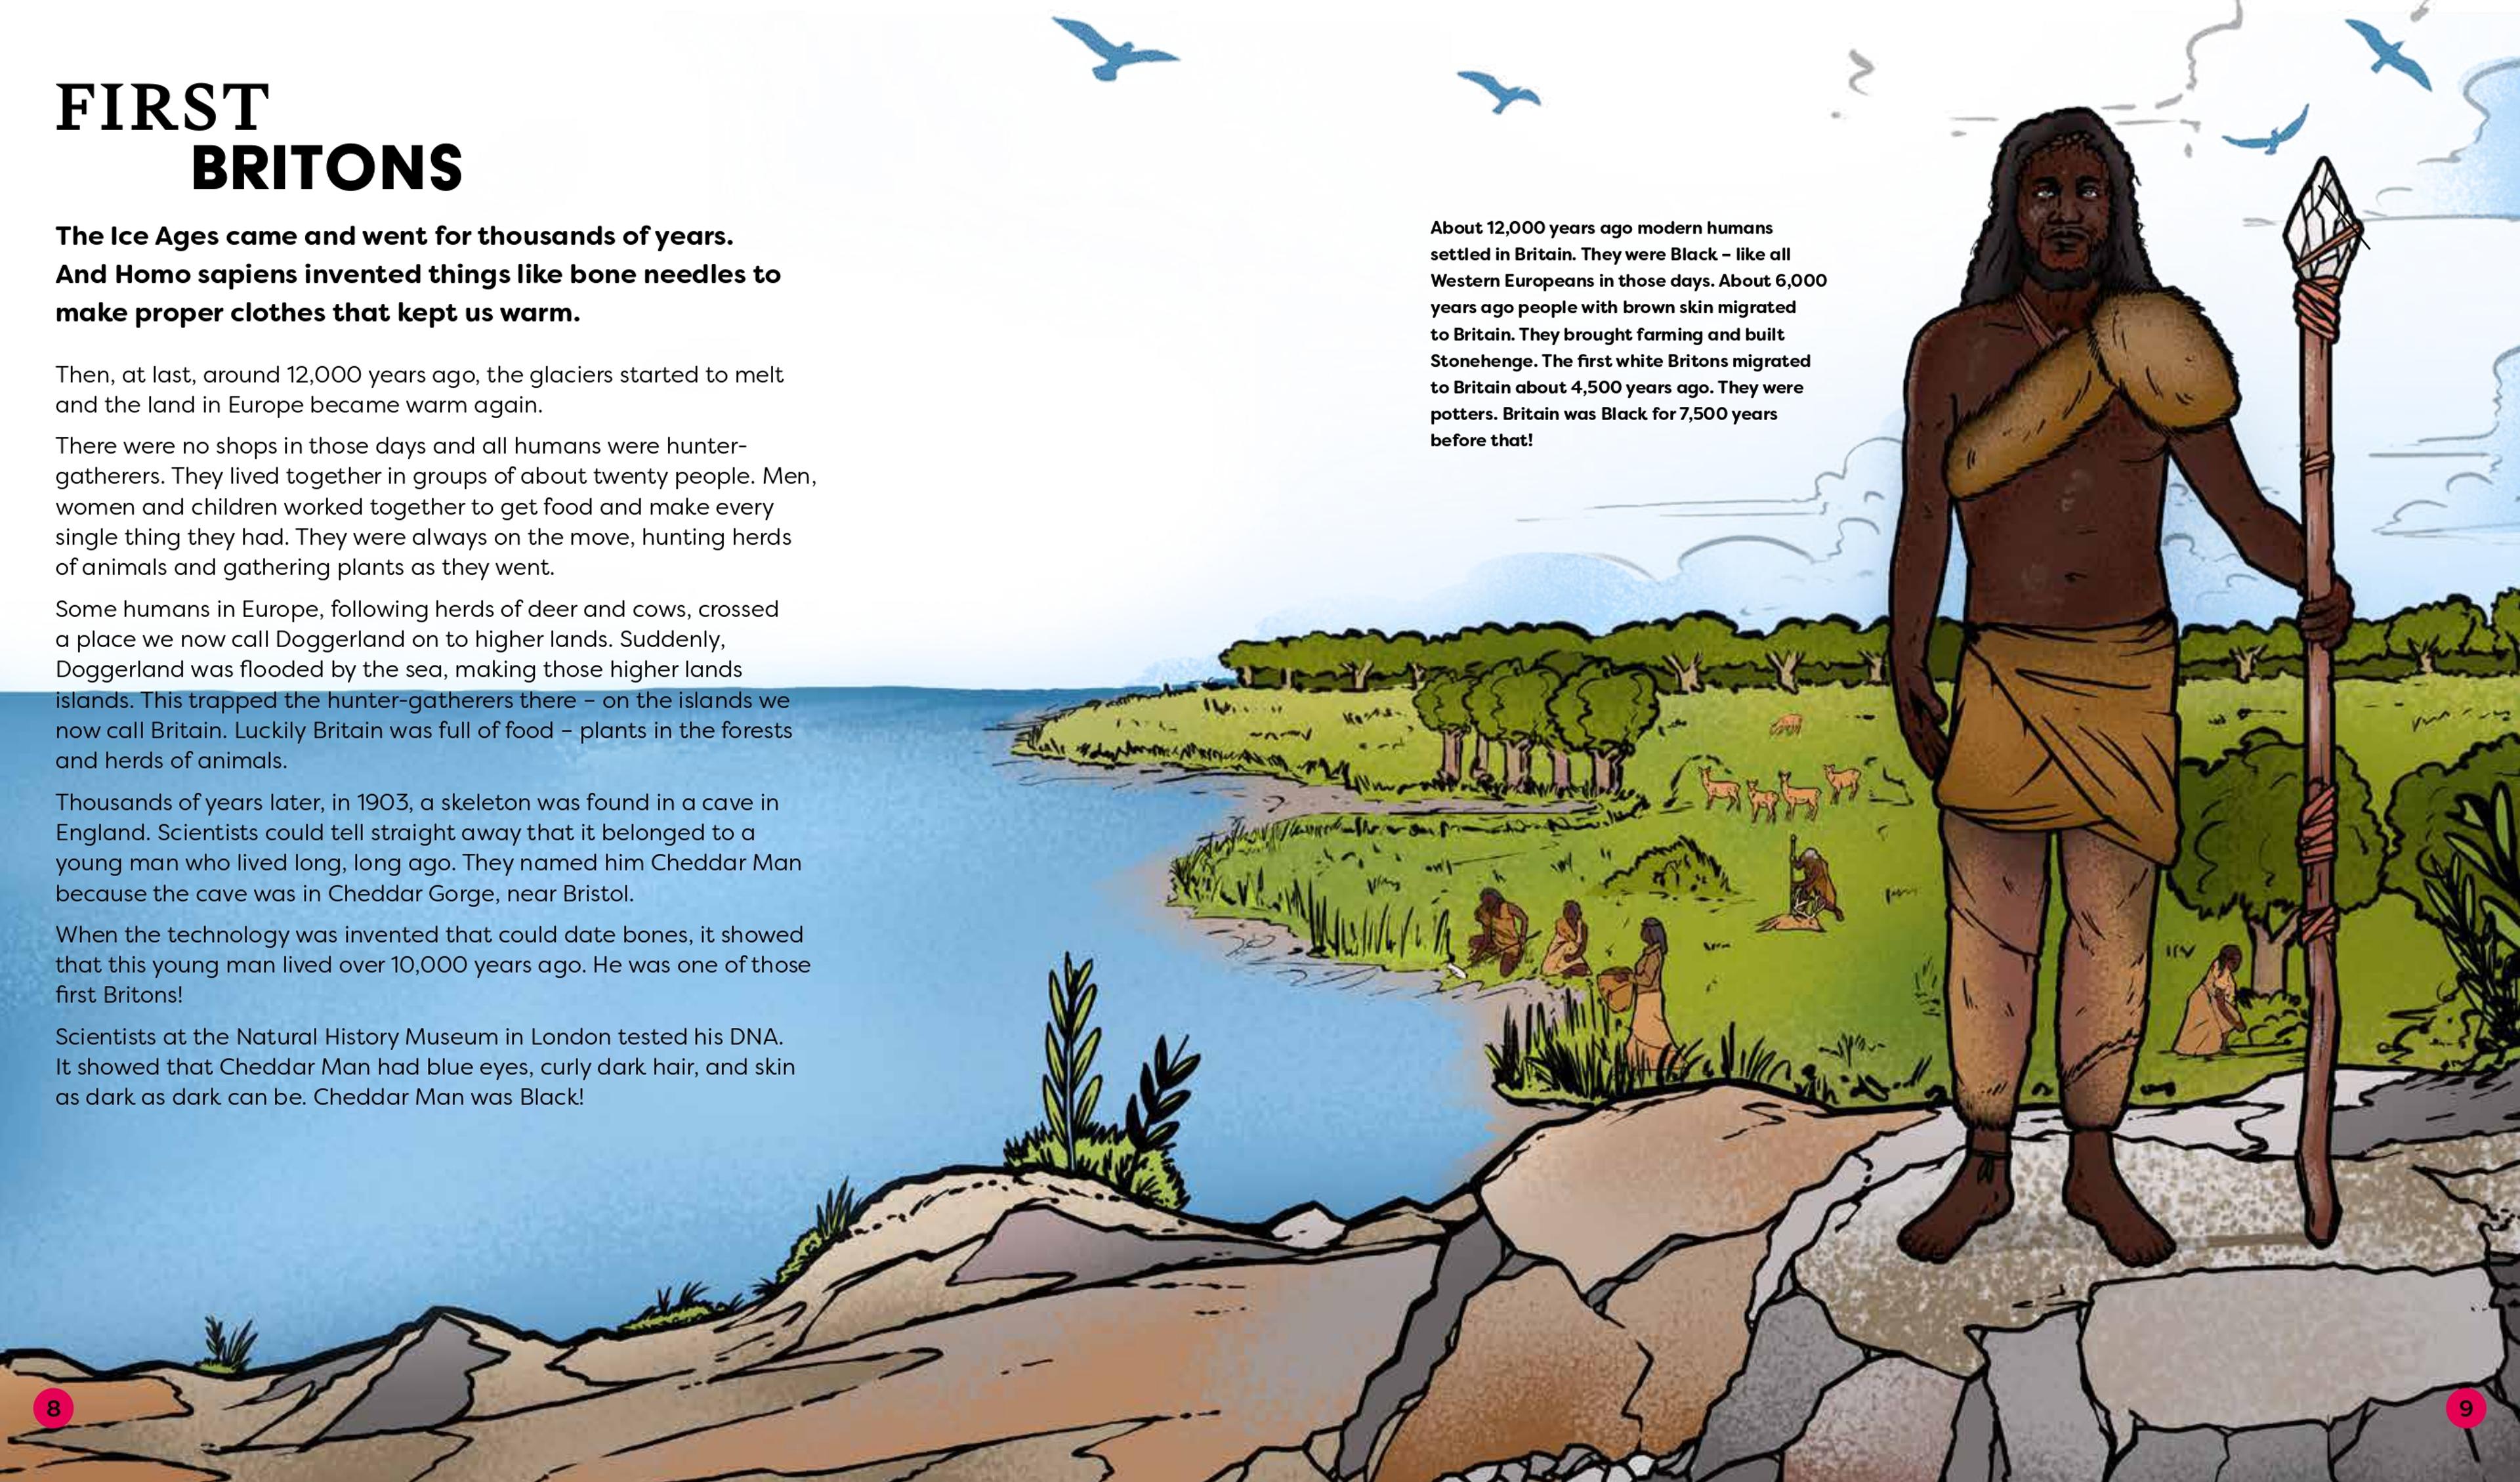 Book spread titled 'First Britons', featuring a block of text and a prehistoric-style figure with long hair holding a spear 